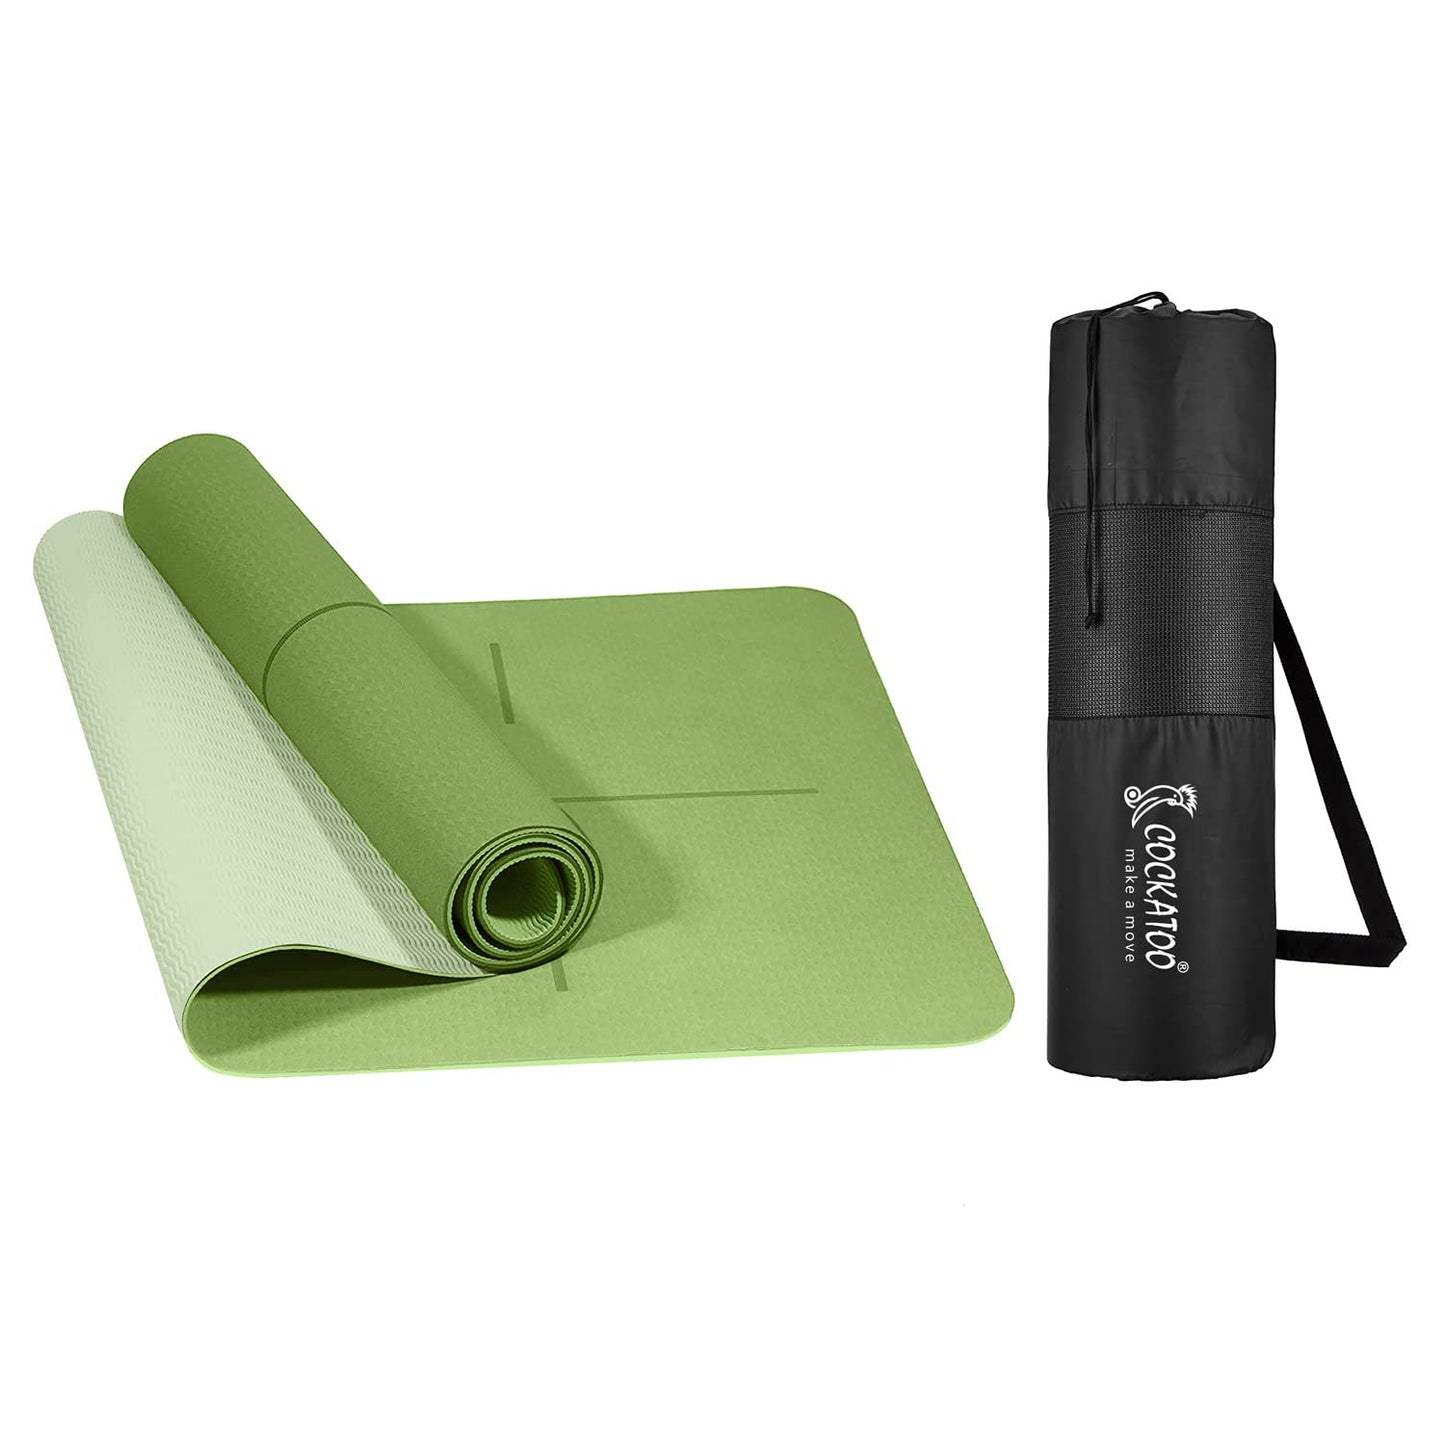 Cockatoo Premium 6 MM TPE Non Slip, Unrolls Flat Always, Sweat Absorbent Yoga Mat For Women and Men with Cover Bag L-183CM x W-61CM (1 Year Warranty)